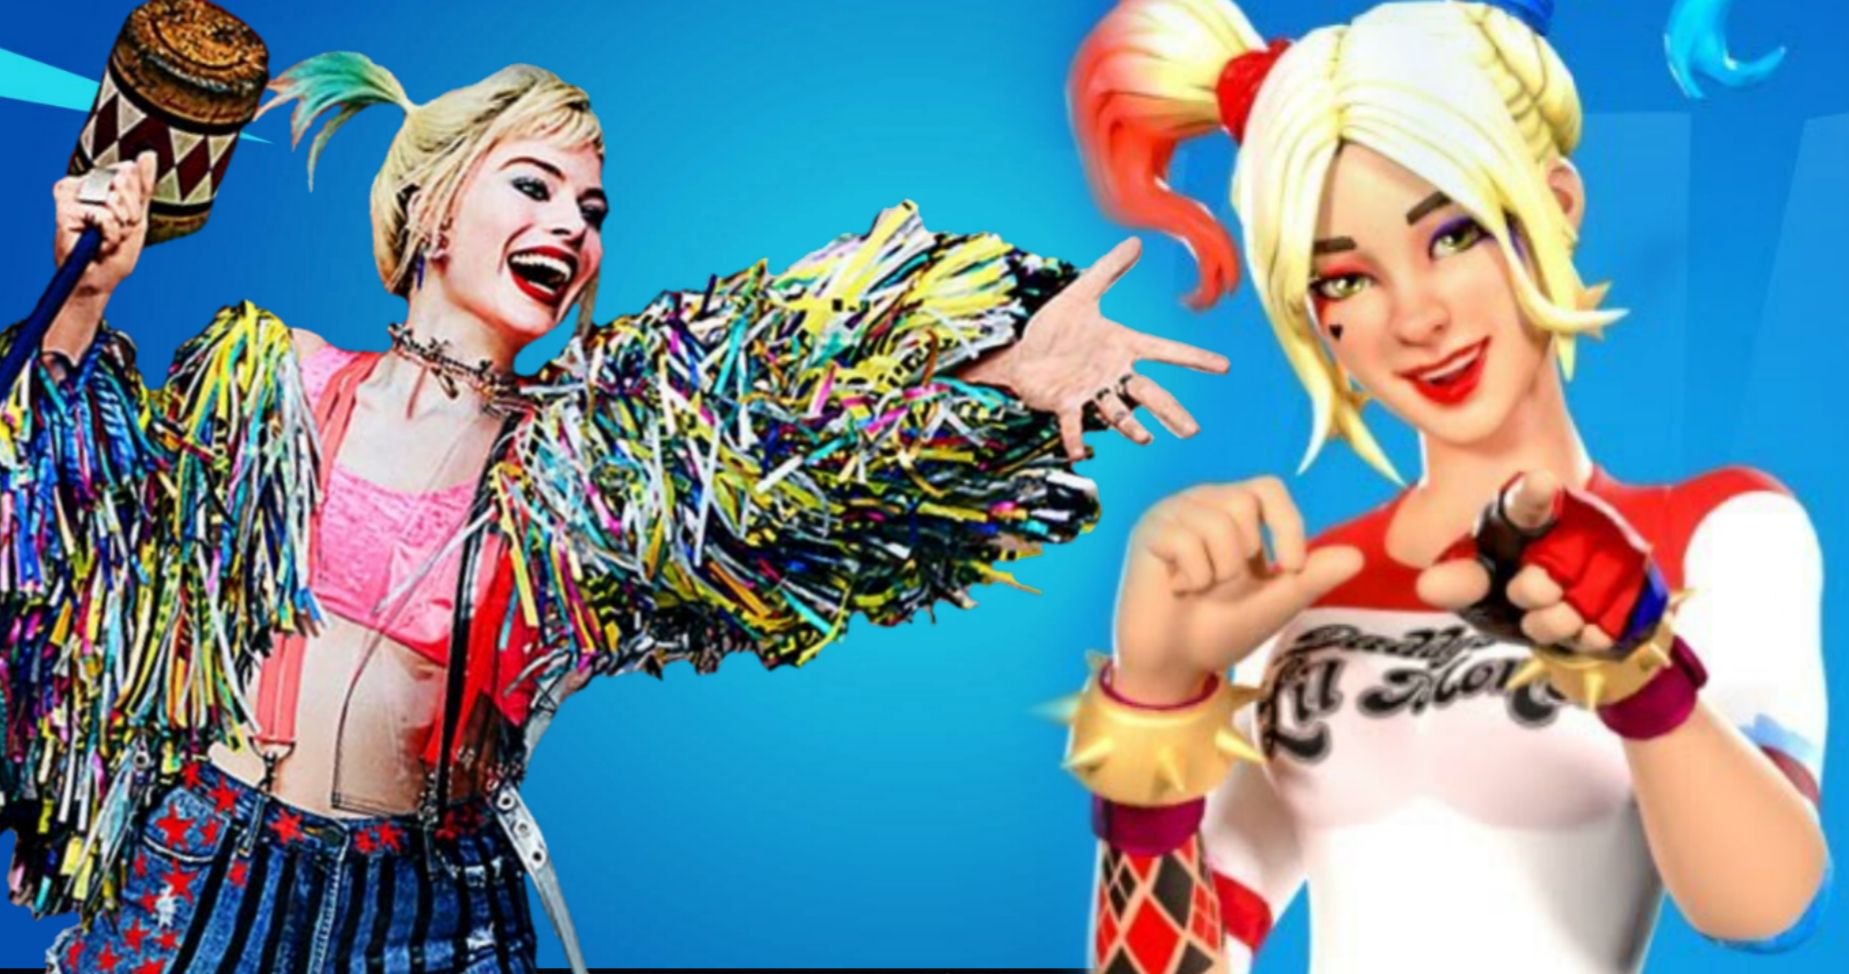 Fortnite Teases Birds of Prey Movie Crossover Featuring Harley Quinn